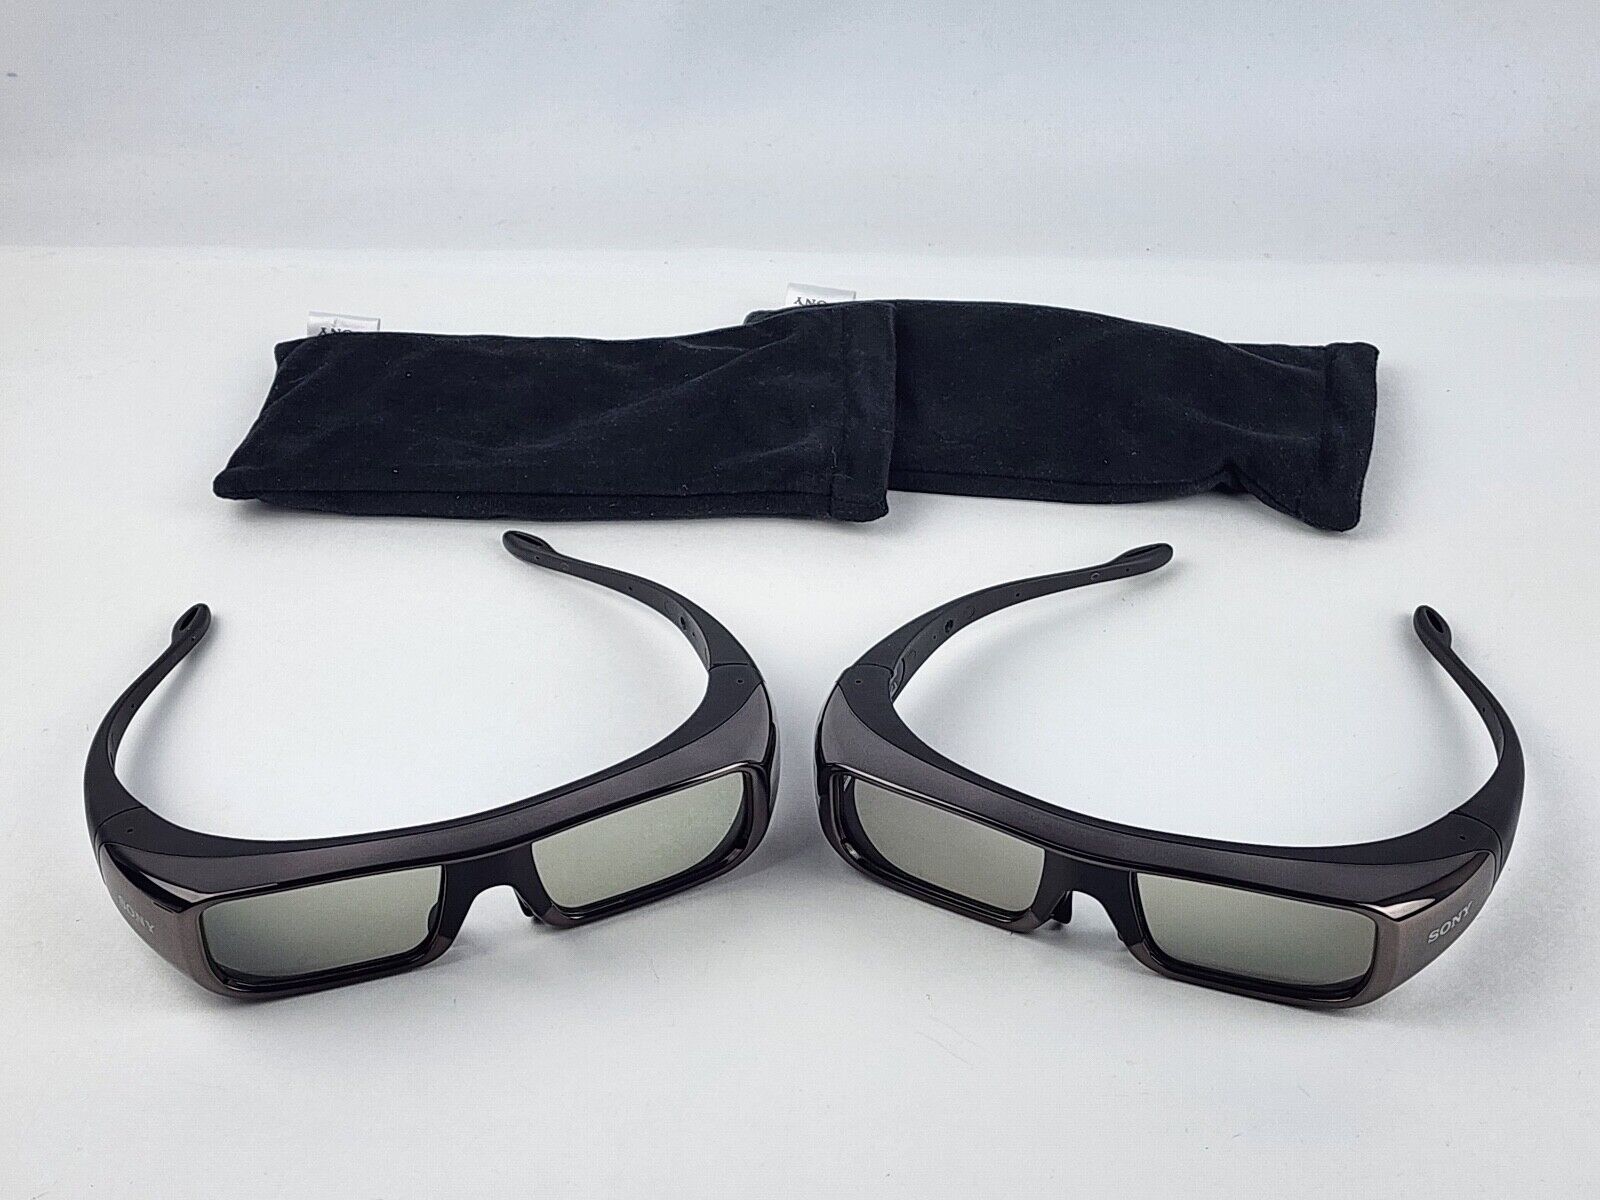 Sony 3D Glasses TDG-BR100 for Sony Bravia TV w/ bags Untested No batteries - $31.67